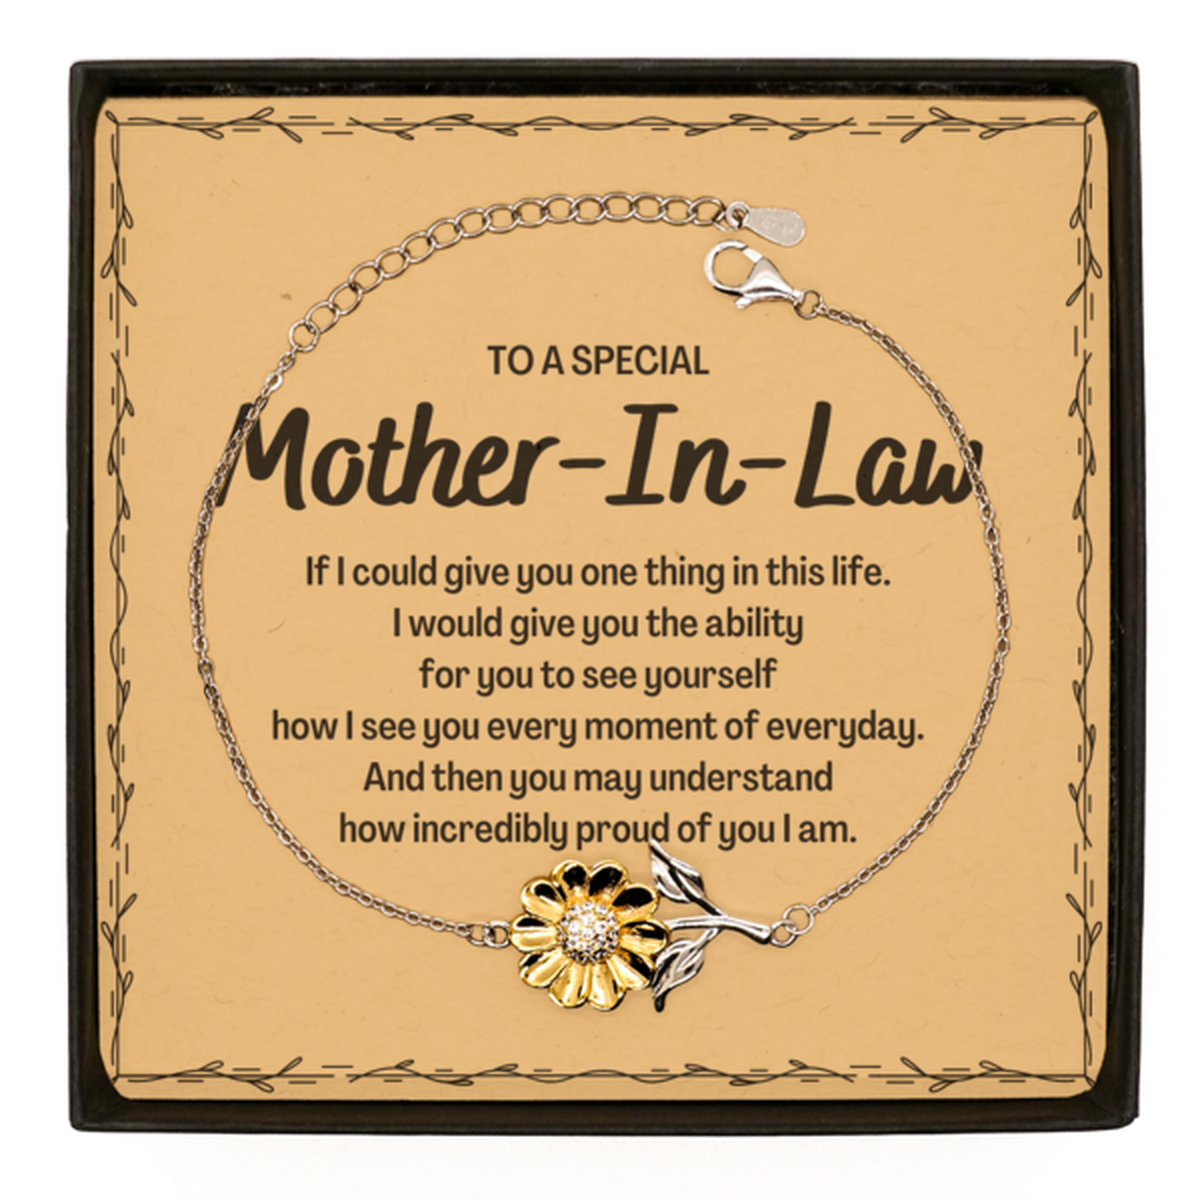 To My Mother-In-Law Sunflower Bracelet, Gifts For Mother-In-Law Message Card, Inspirational Gifts for Christmas Birthday, Epic Gifts for Mother-In-Law To A Special Mother-In-Law how incredibly proud of you I am